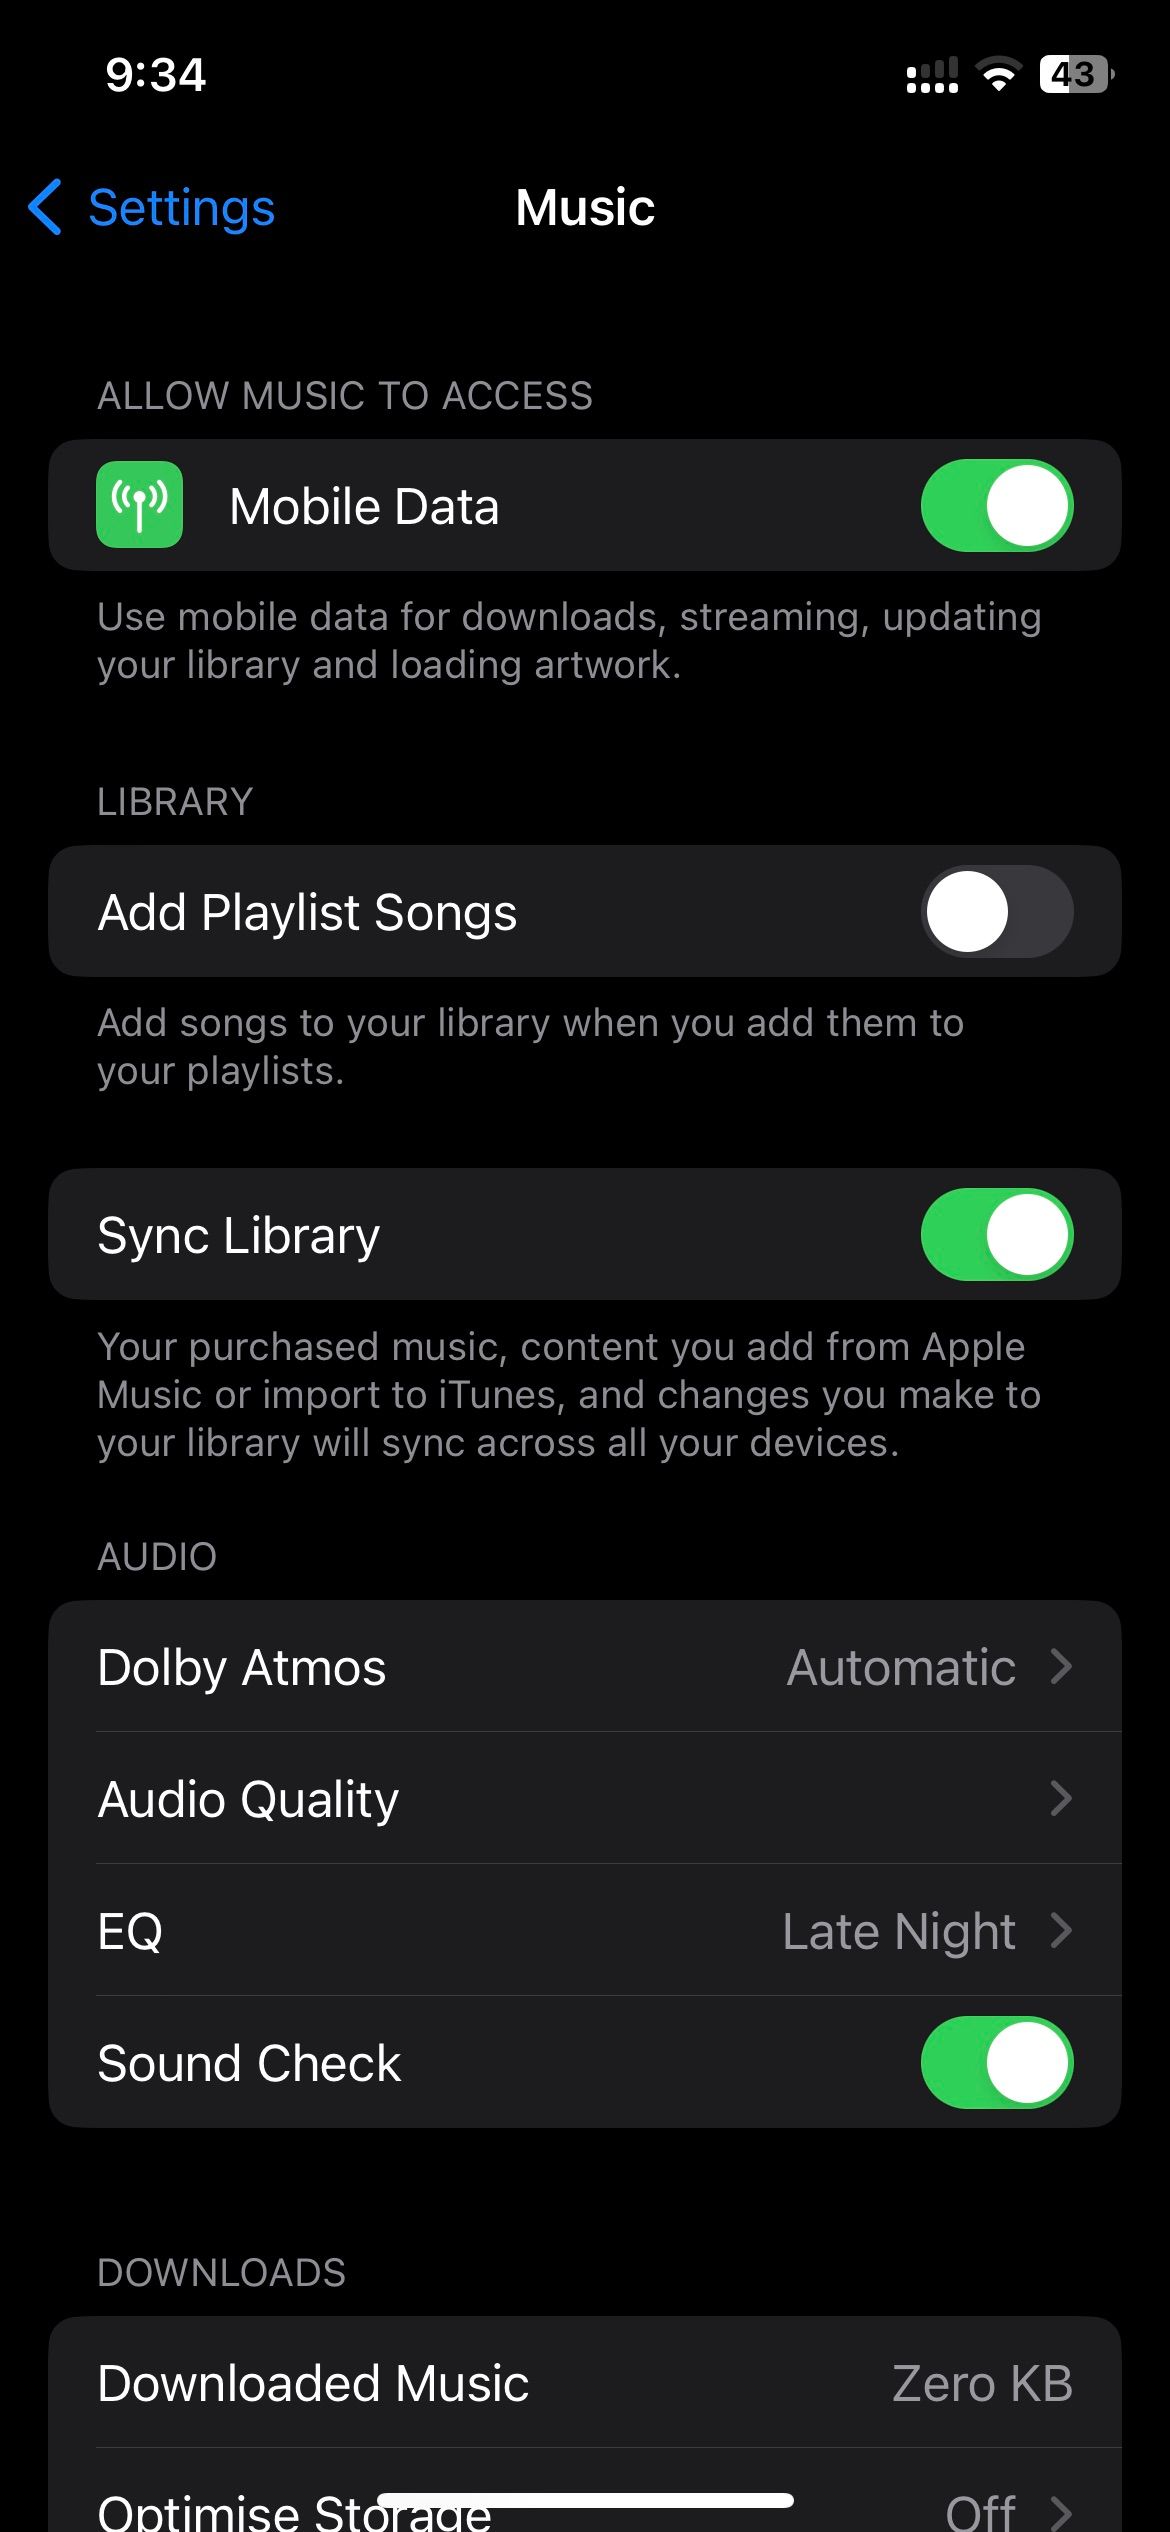 toggle off Sync Library option